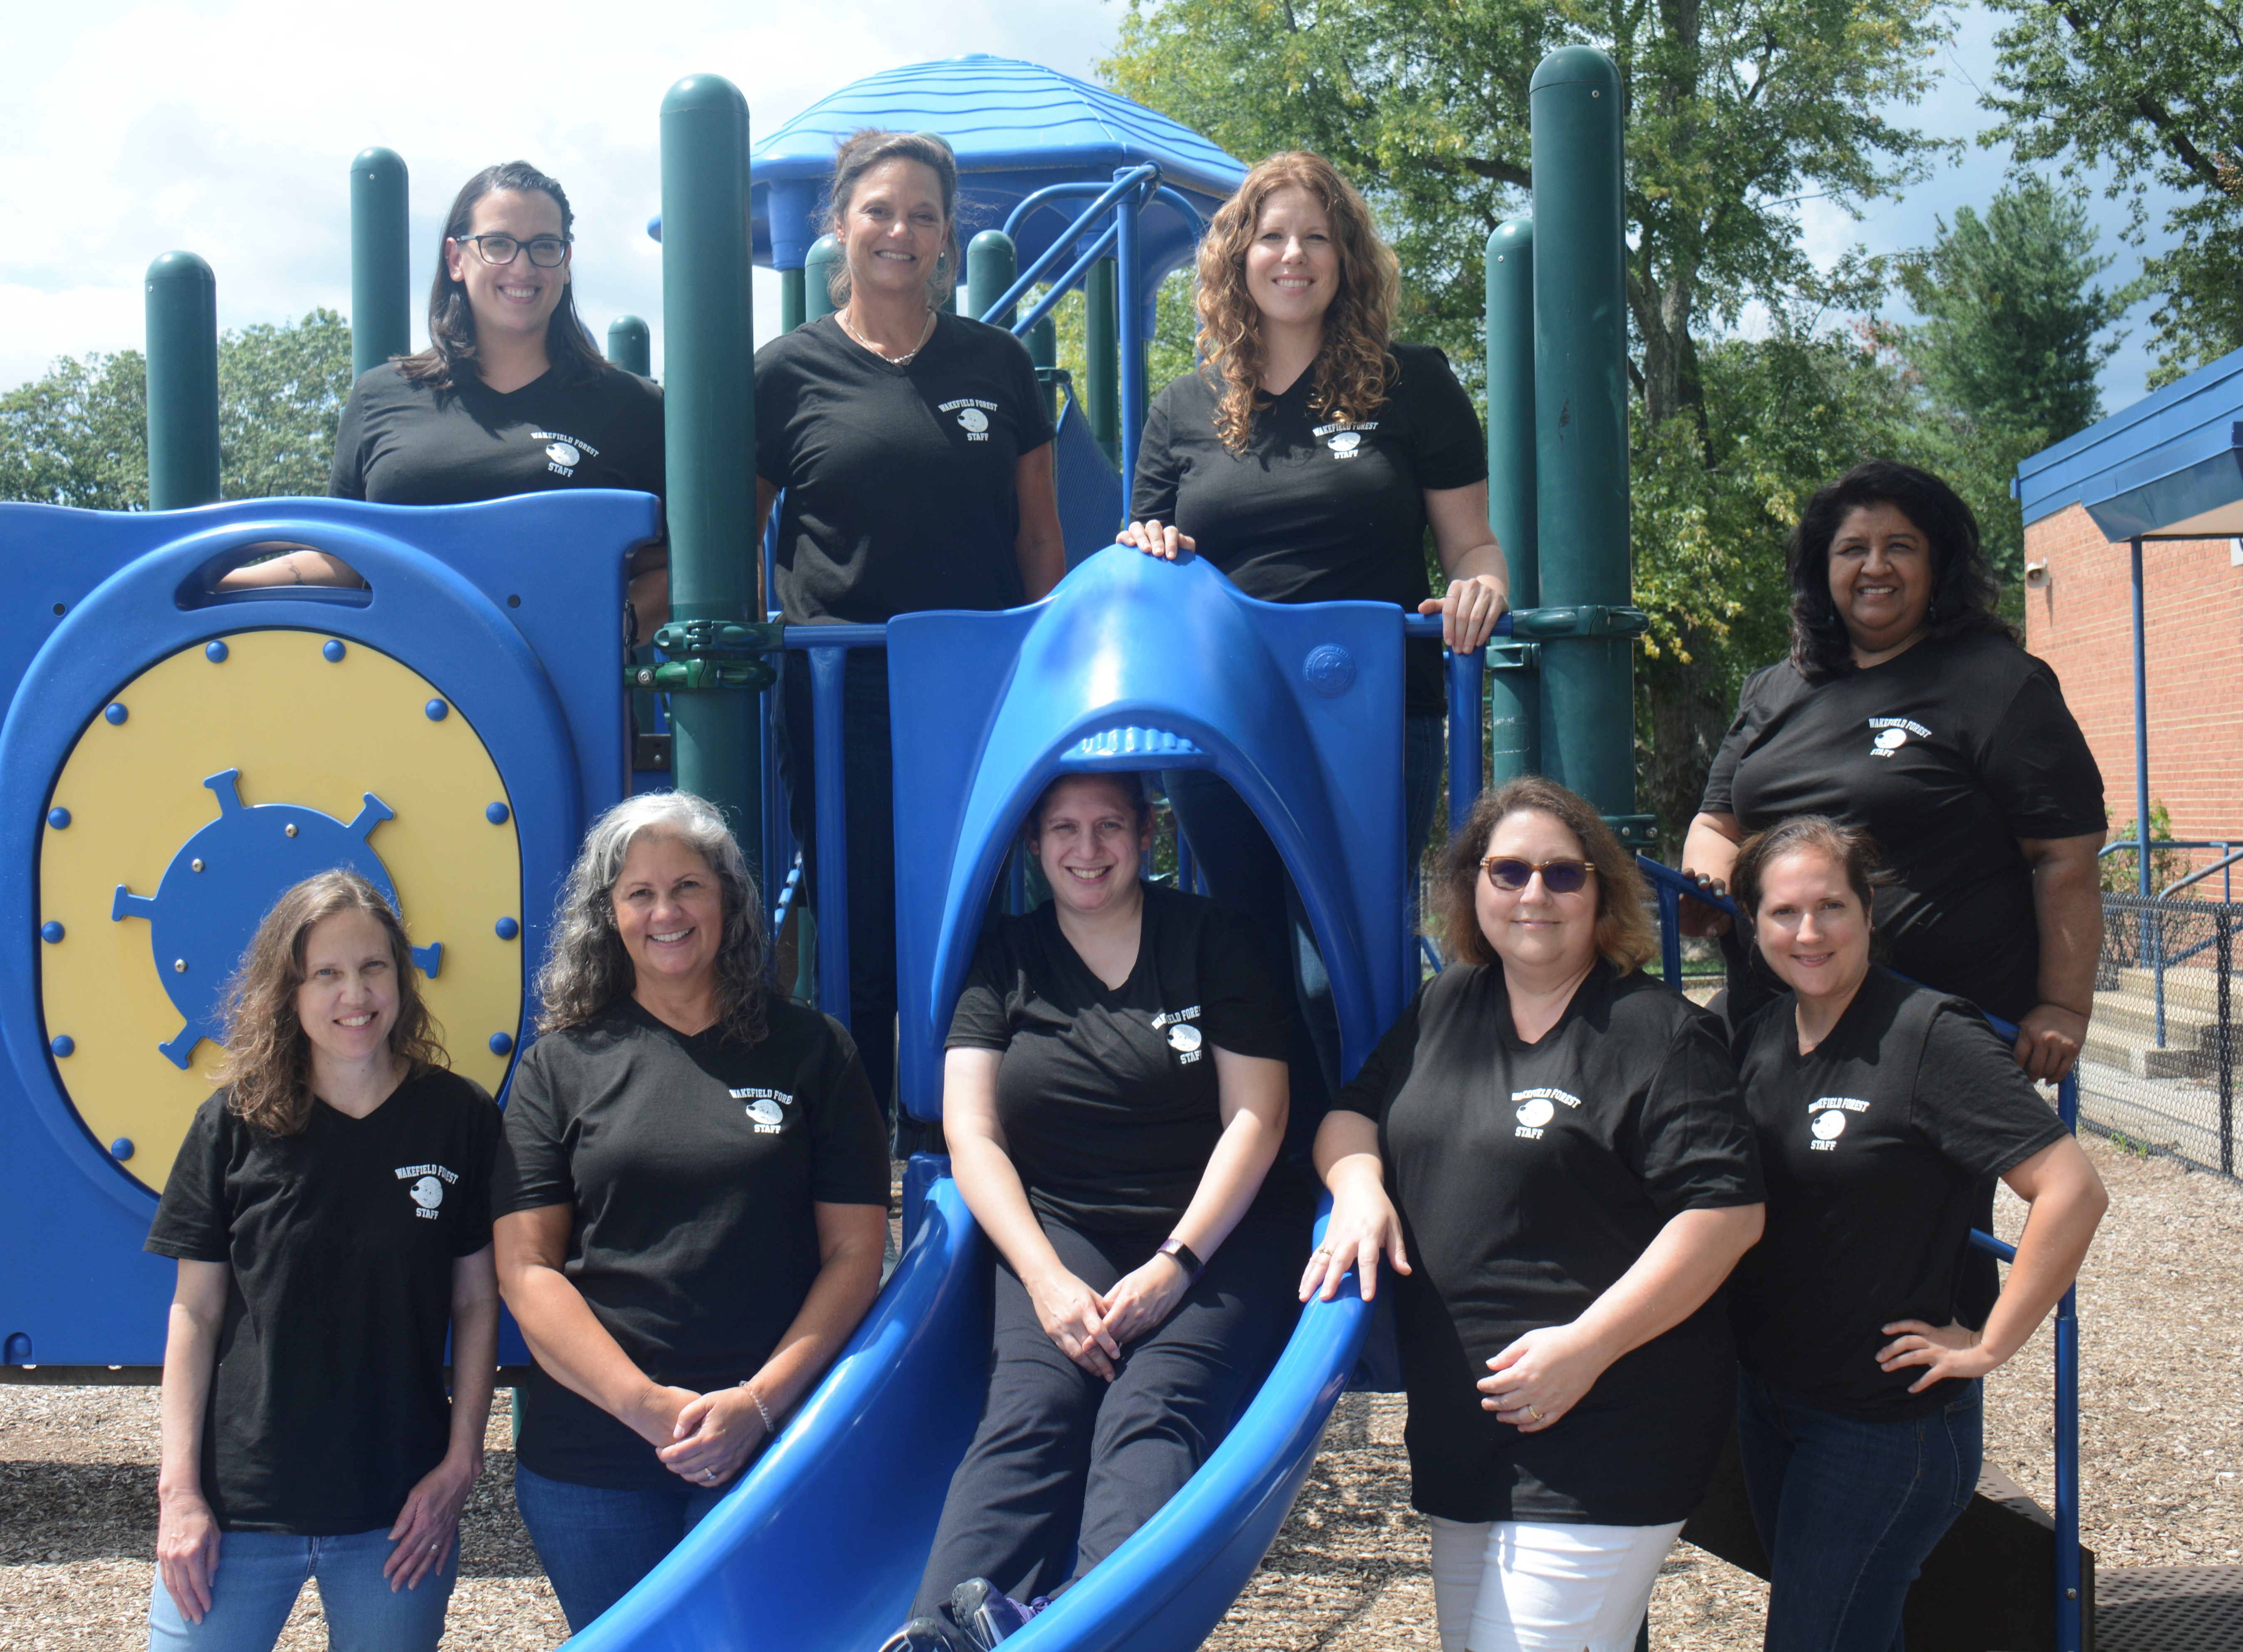 Picture of the kindergarten teachers outside on playground equipment